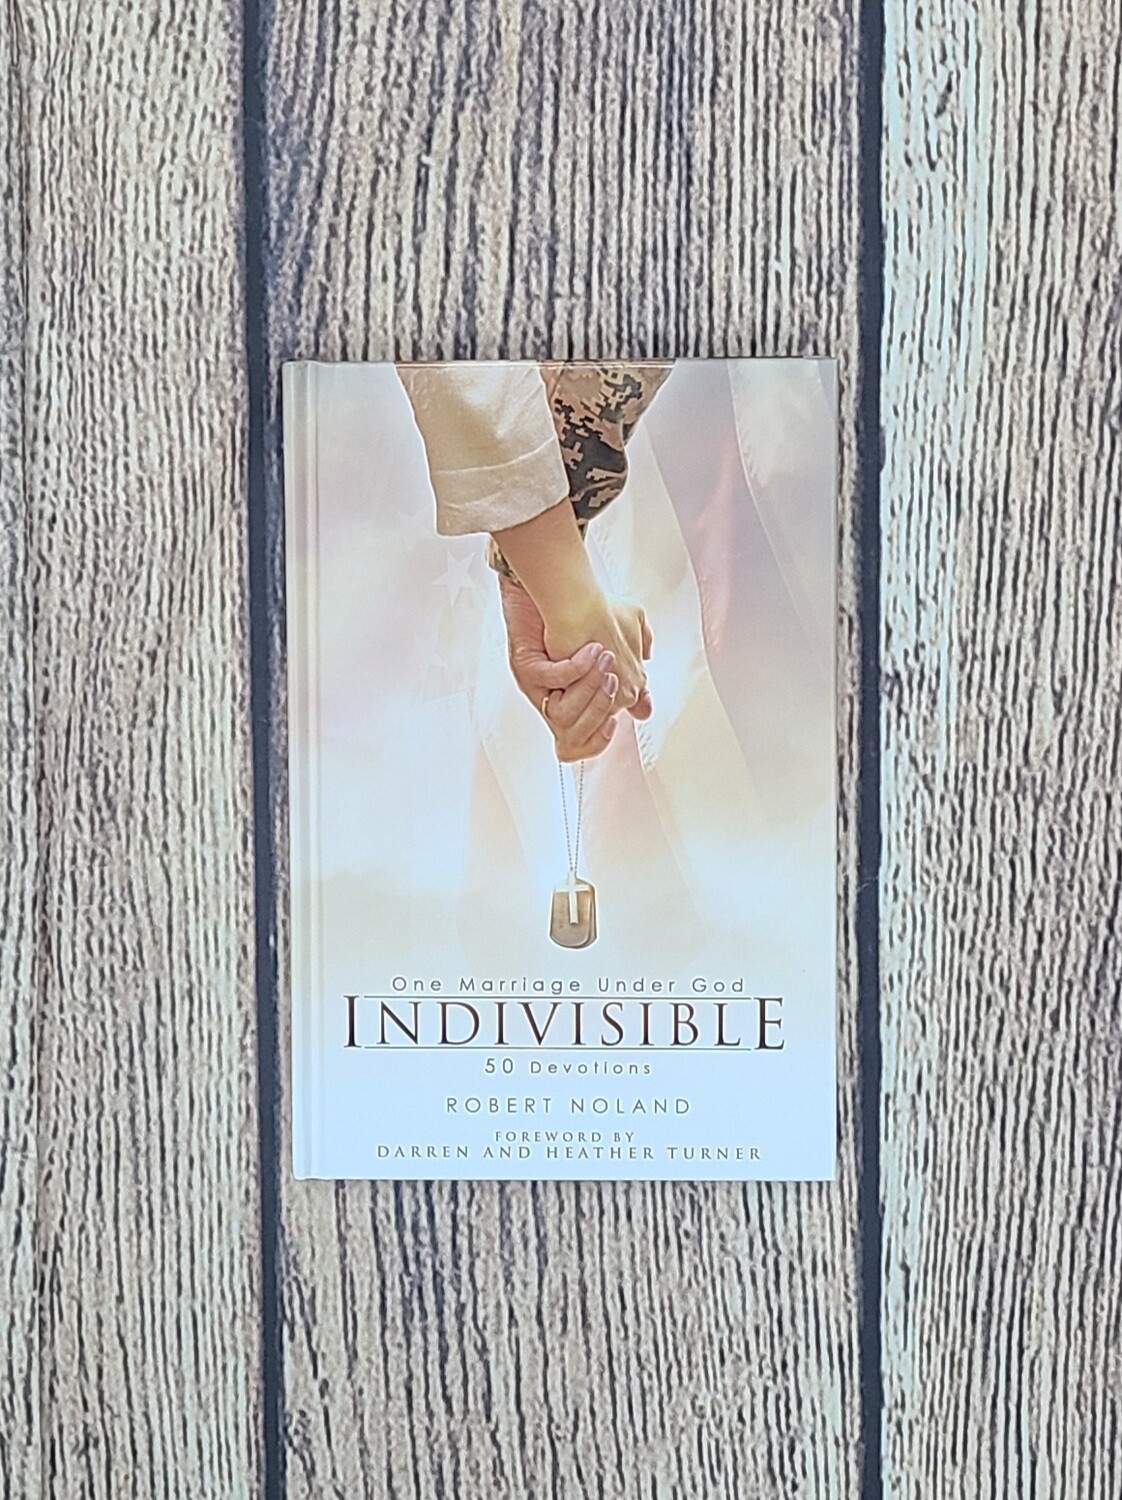 One Marriage under God: Indivisible - 50 Devotions by Robert Noland and Darren and Heather Turner